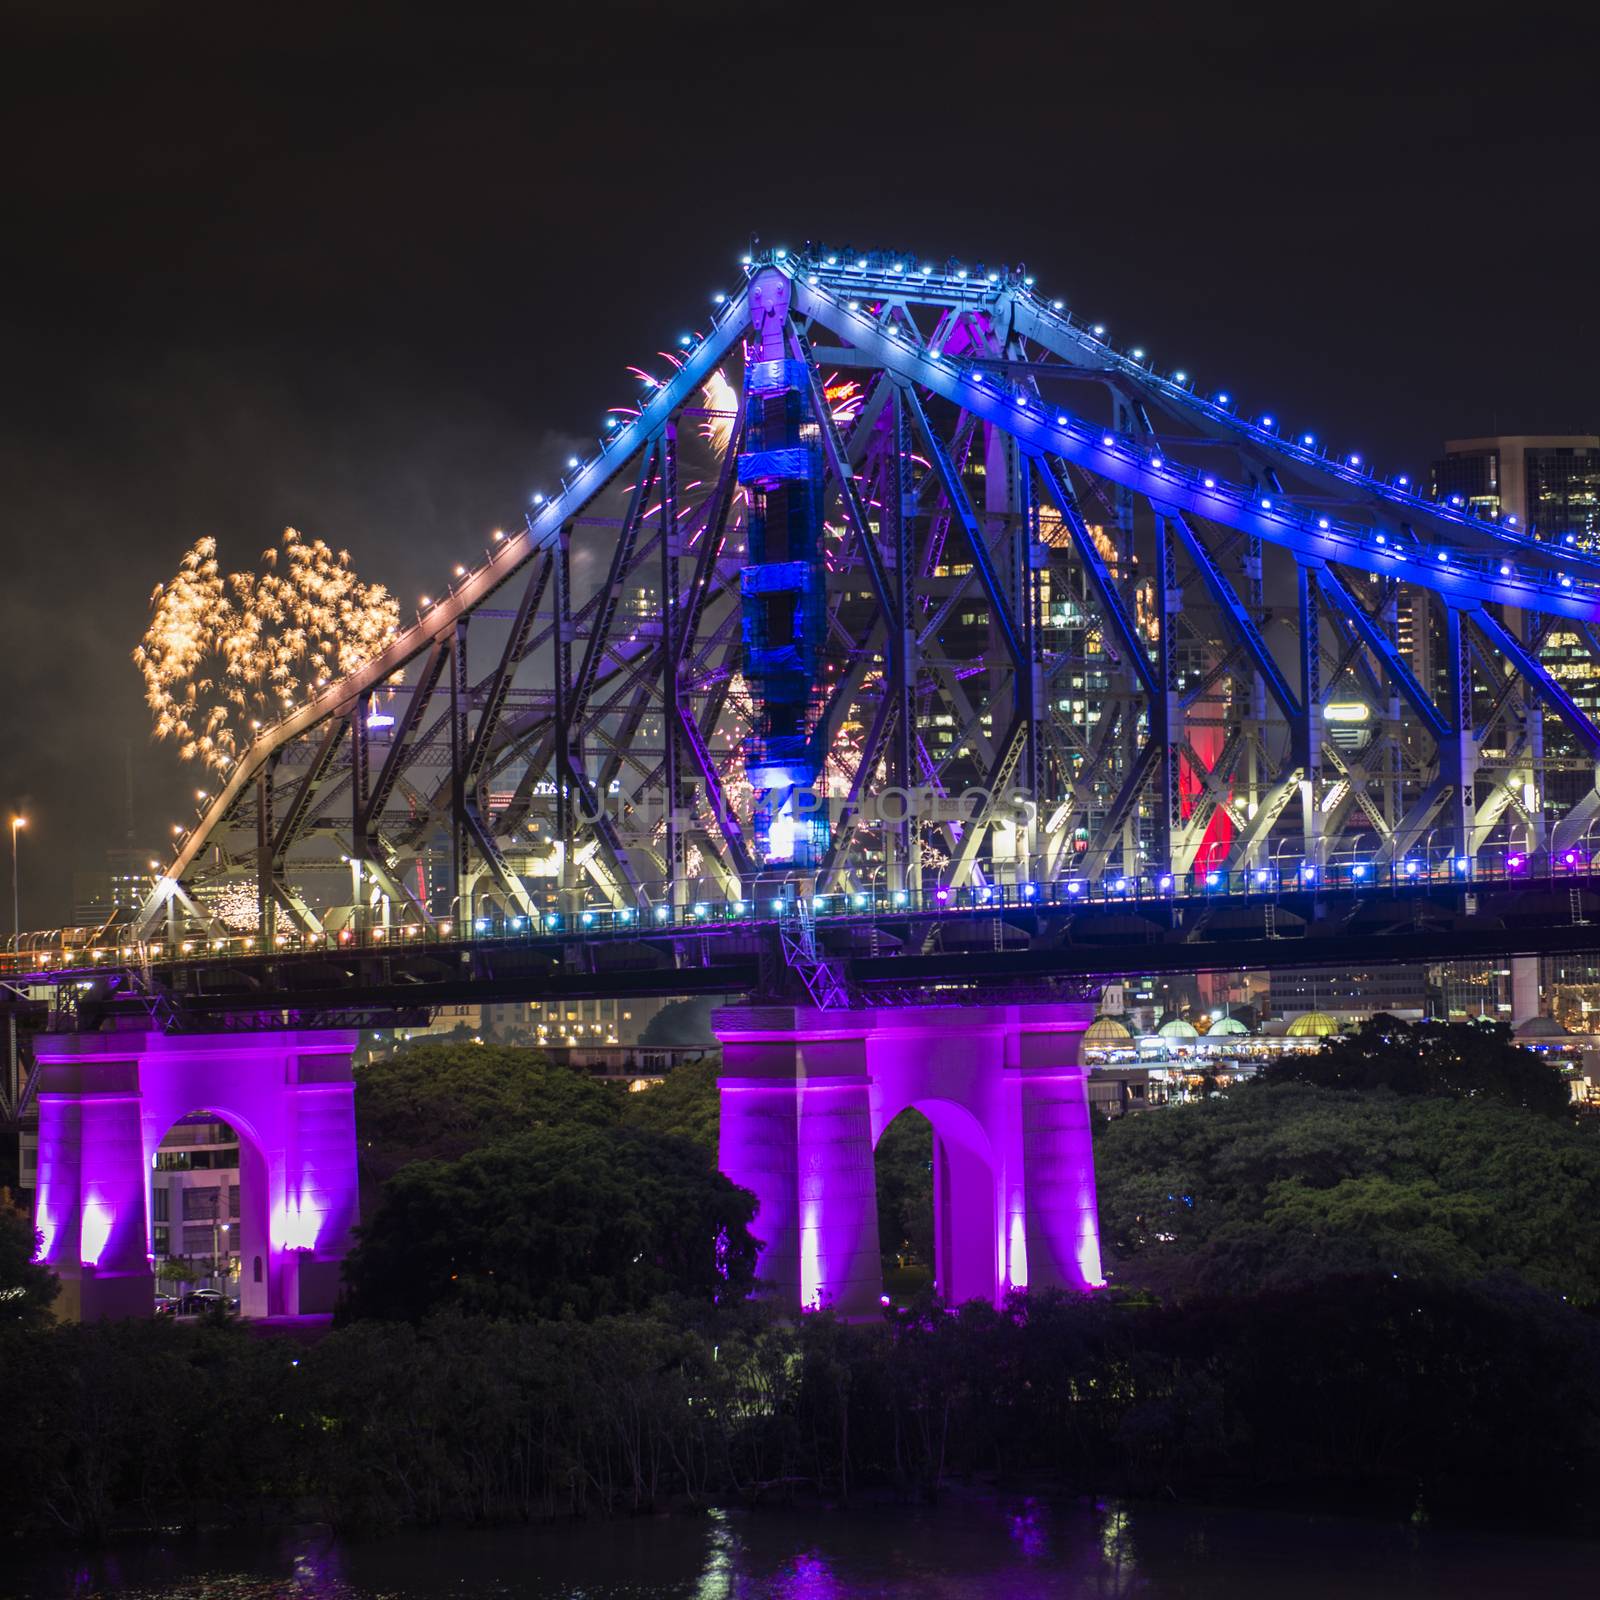 The iconic Story Bridge on New Years Eve 2016 with fireworks in Brisbane, Queensland, Australia